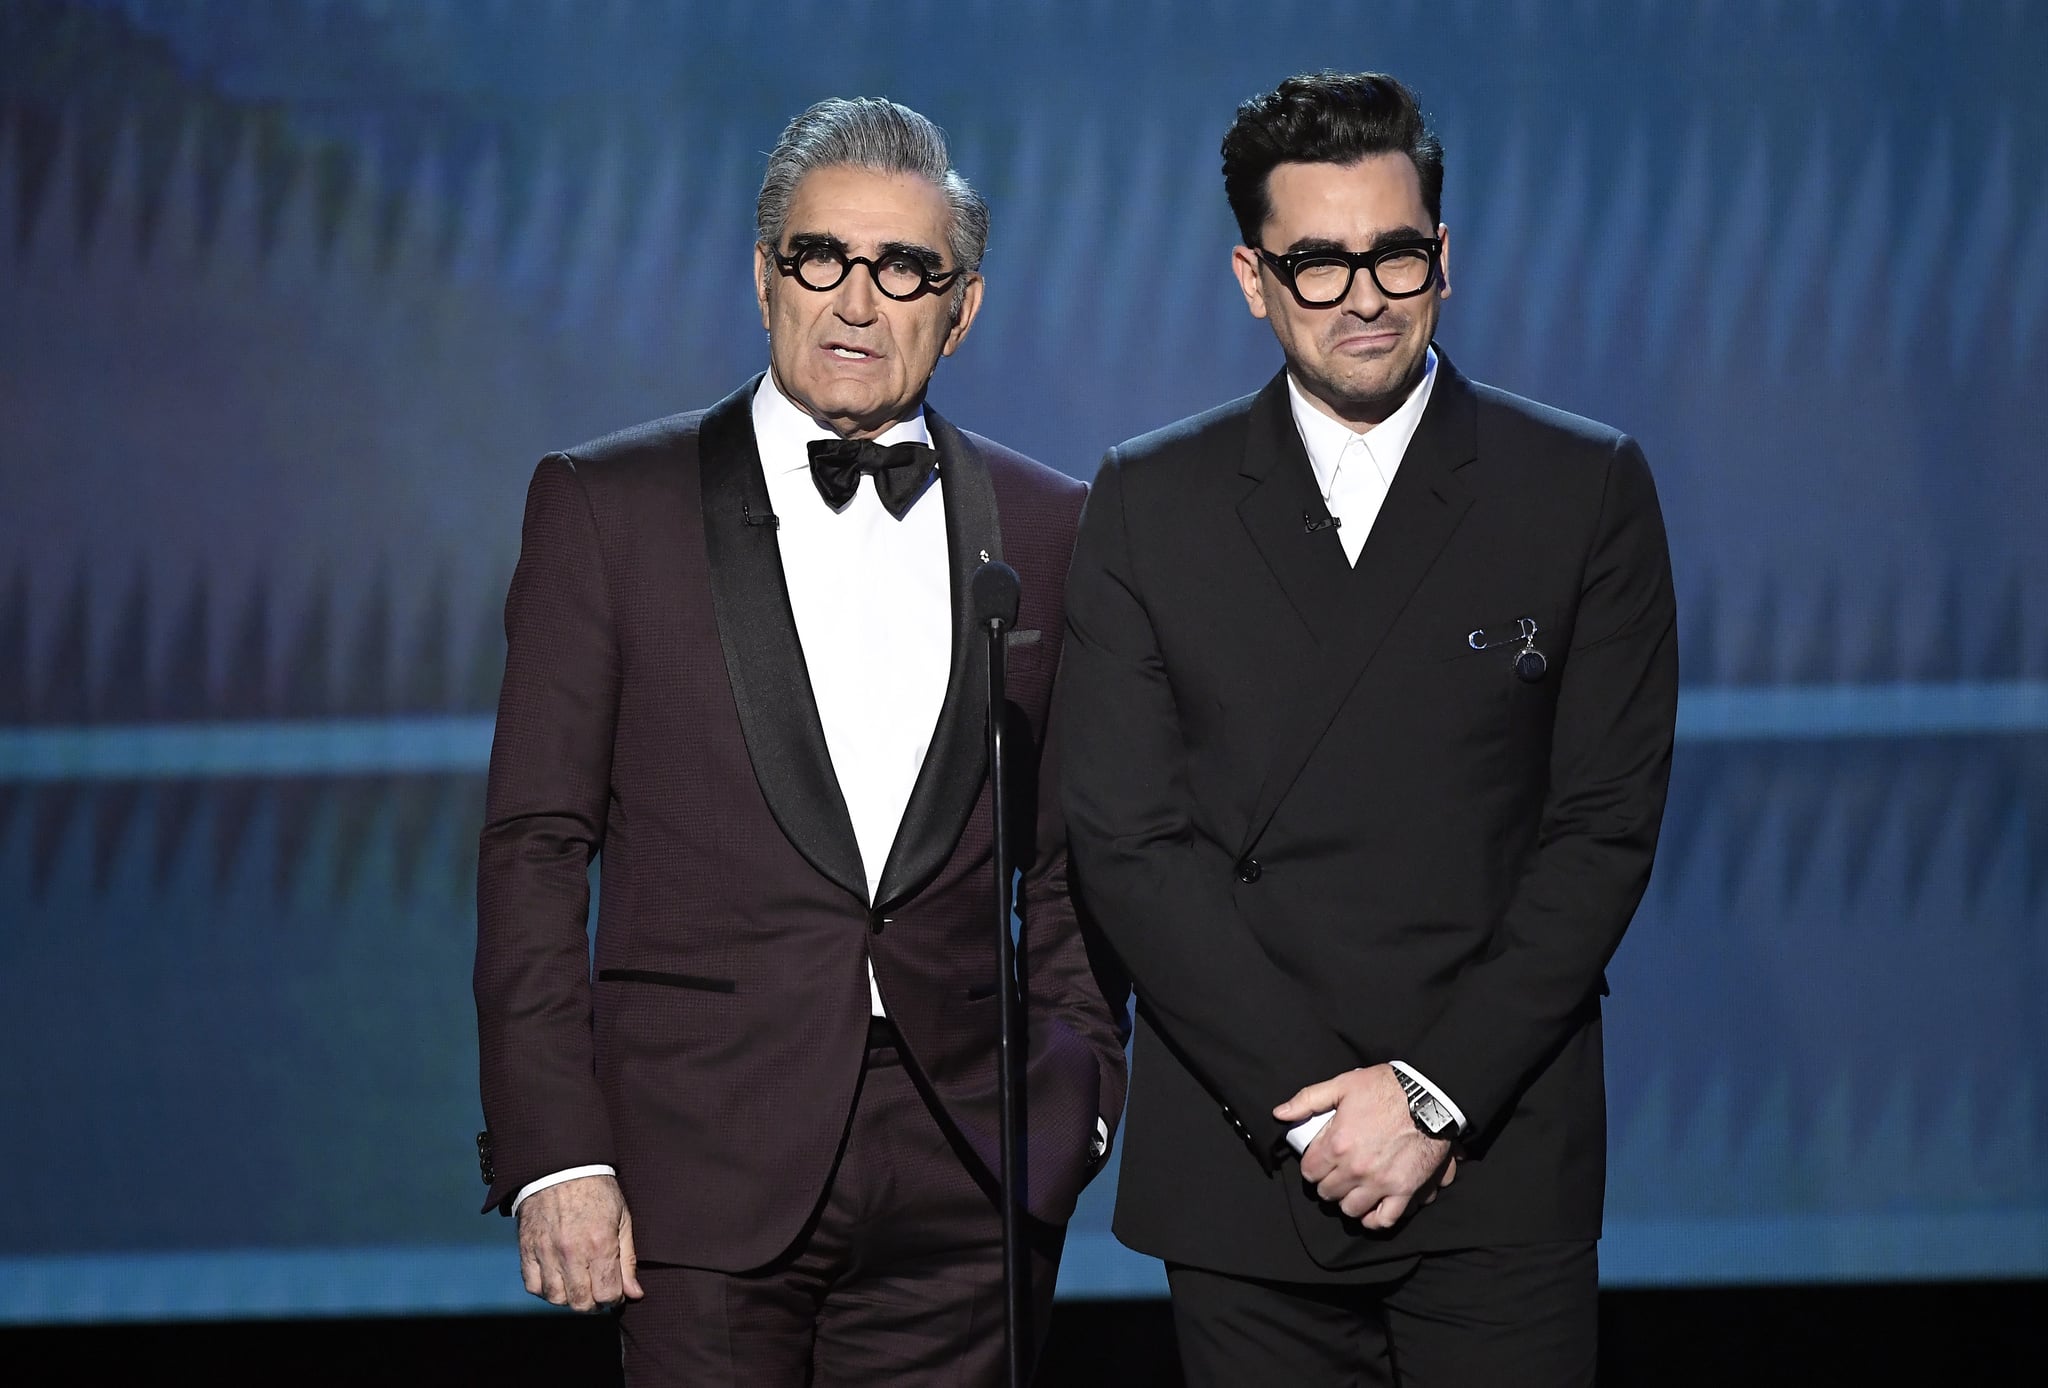 LOS ANGELES, CALIFORNIA - JANUARY 19: (L-R) Eugene Levy and  Dan Levy speak onstage at the 26th Annual Screen Actors Guild Awards at The Shrine Auditorium on January 19, 2020 in Los Angeles, California. 721359 (Photo by Kevork Djansezian/Getty Images for Turner)